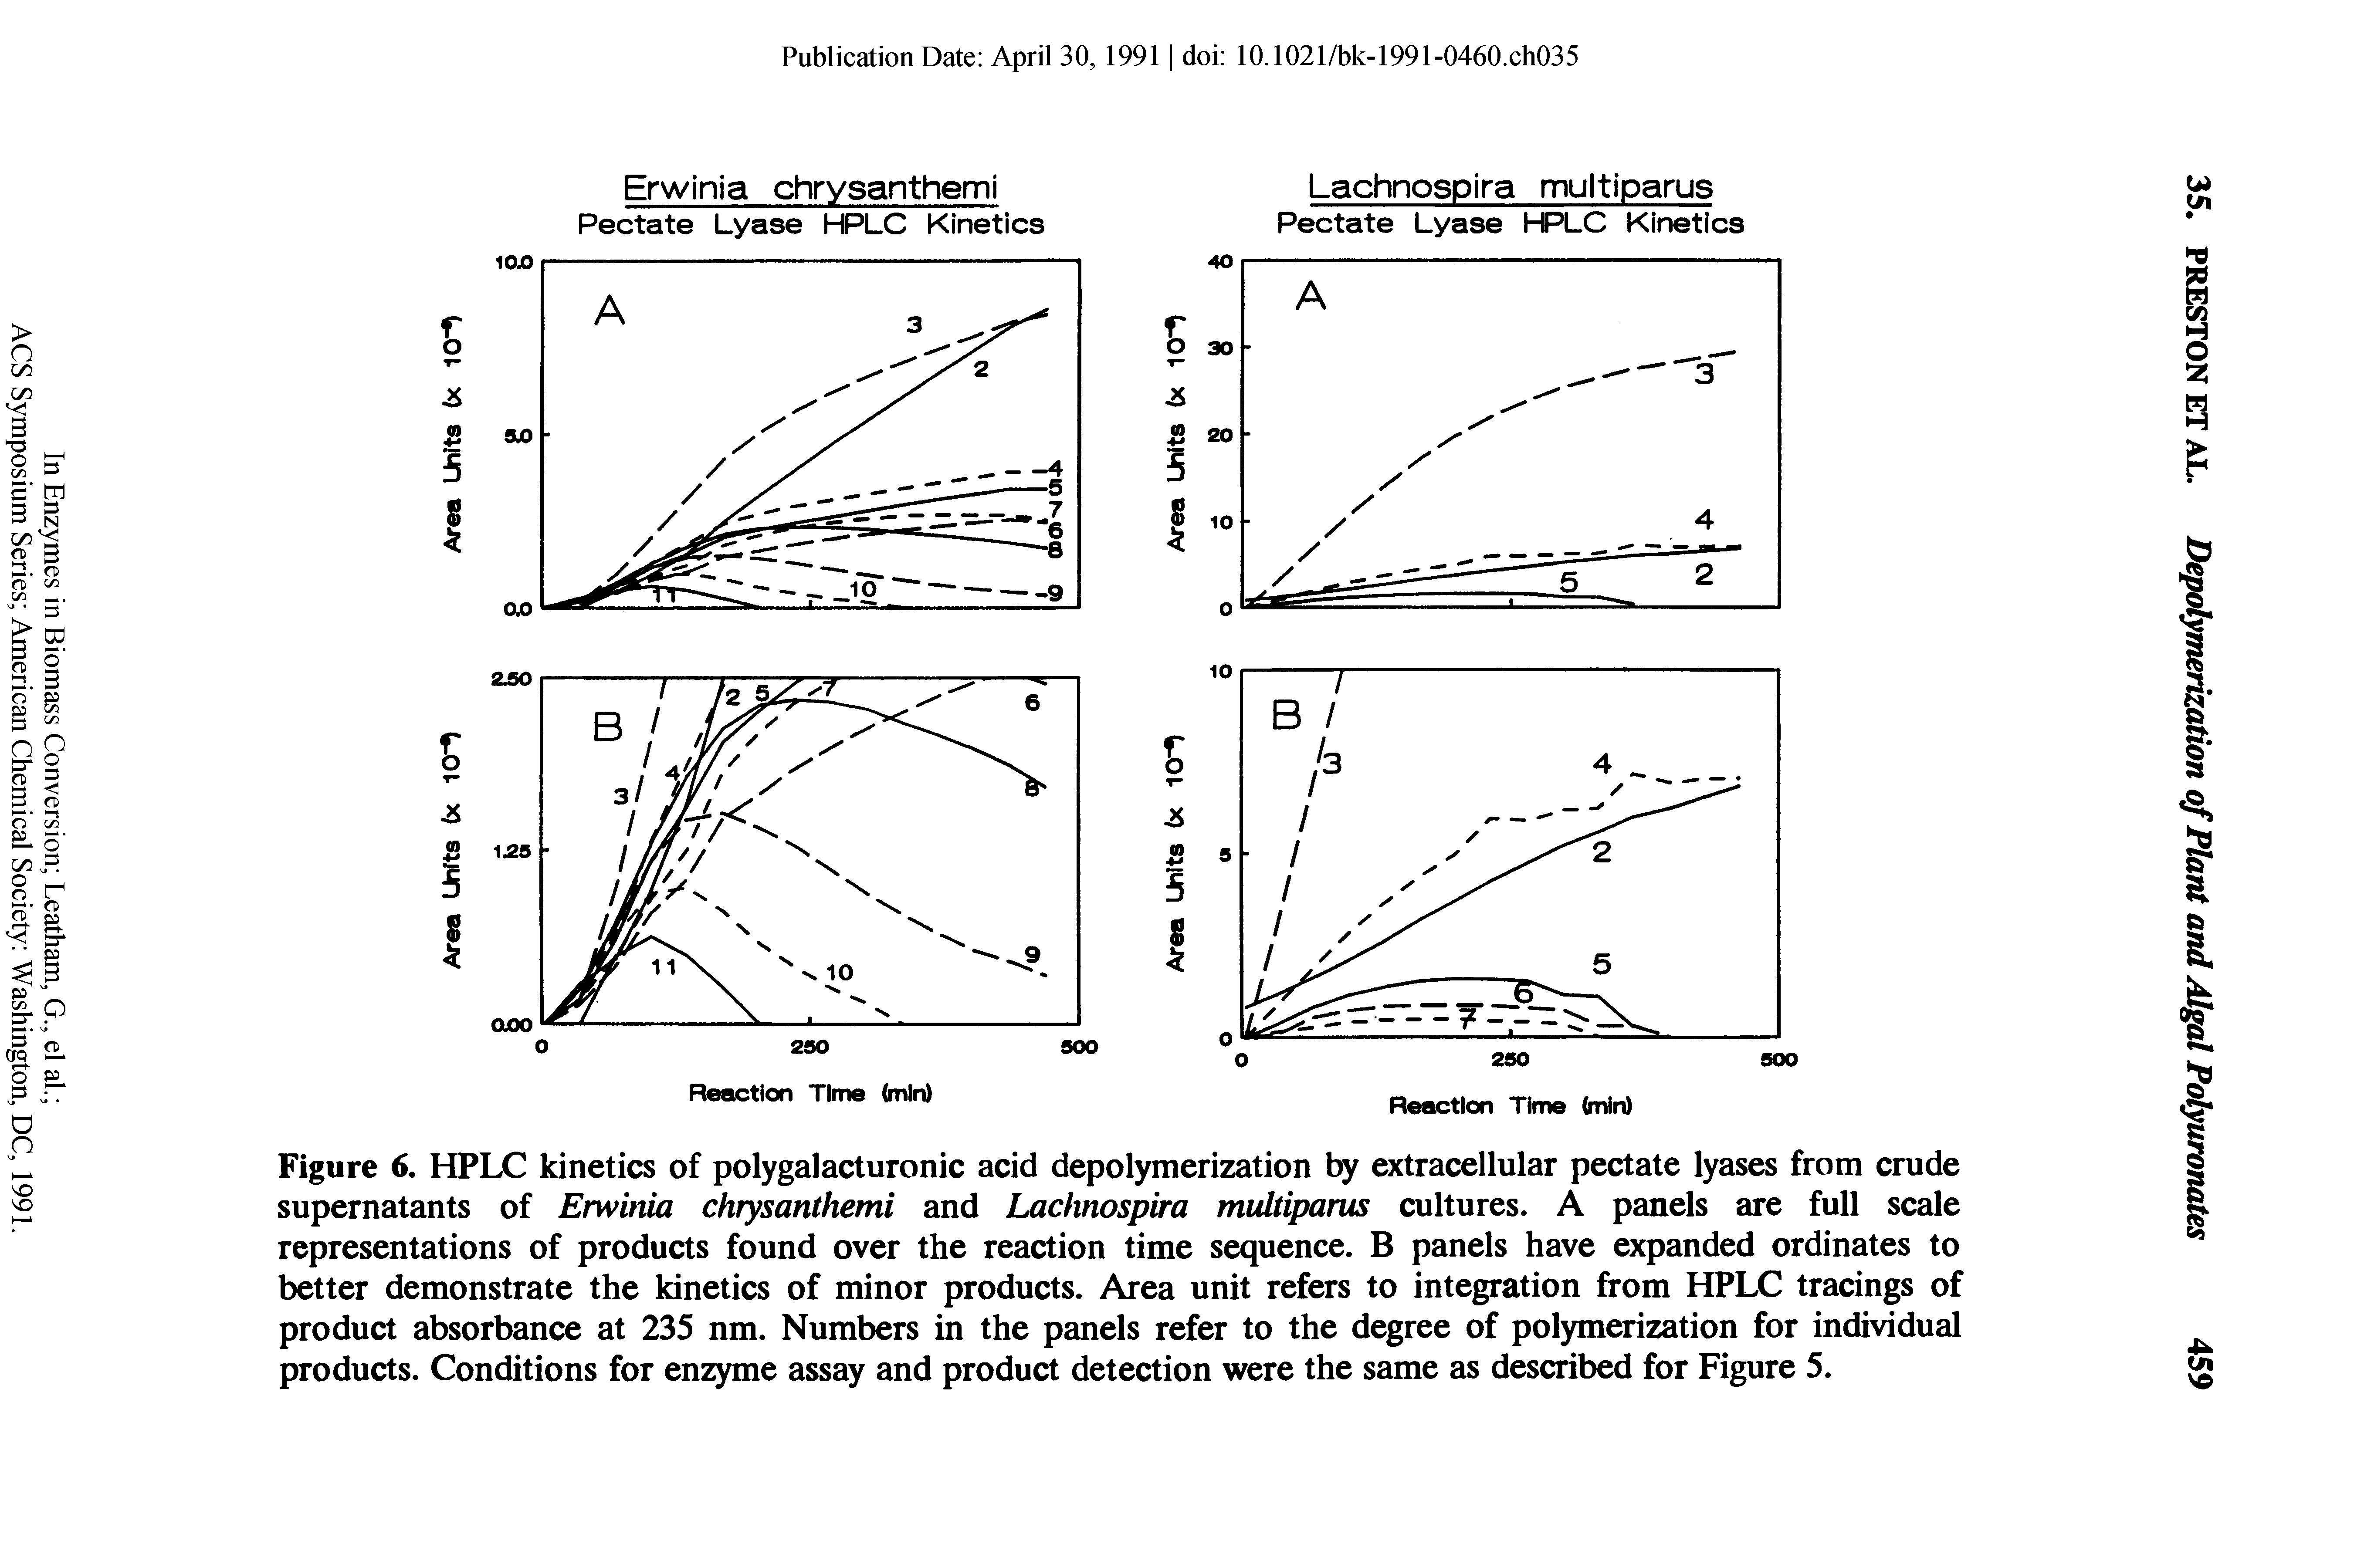 Figure 6. HPLC kinetics of polygalacturonic acid depolymerization by extracellular pectate lyases from crude supernatants of Erwinia chrysanthemi and Lachnospira multiparus cultures. A panels are full scale representations of products found over the reaction time sequence. B panels have expanded ordinates to better demonstrate the kinetics of minor products. Area unit refers to integration from HPLC tracings of product absorbance at 235 nm. Numbers in the panels refer to the degree of polymerization for individual products. Conditions for enzyme assay and product detection were the same as described for Figure 5.